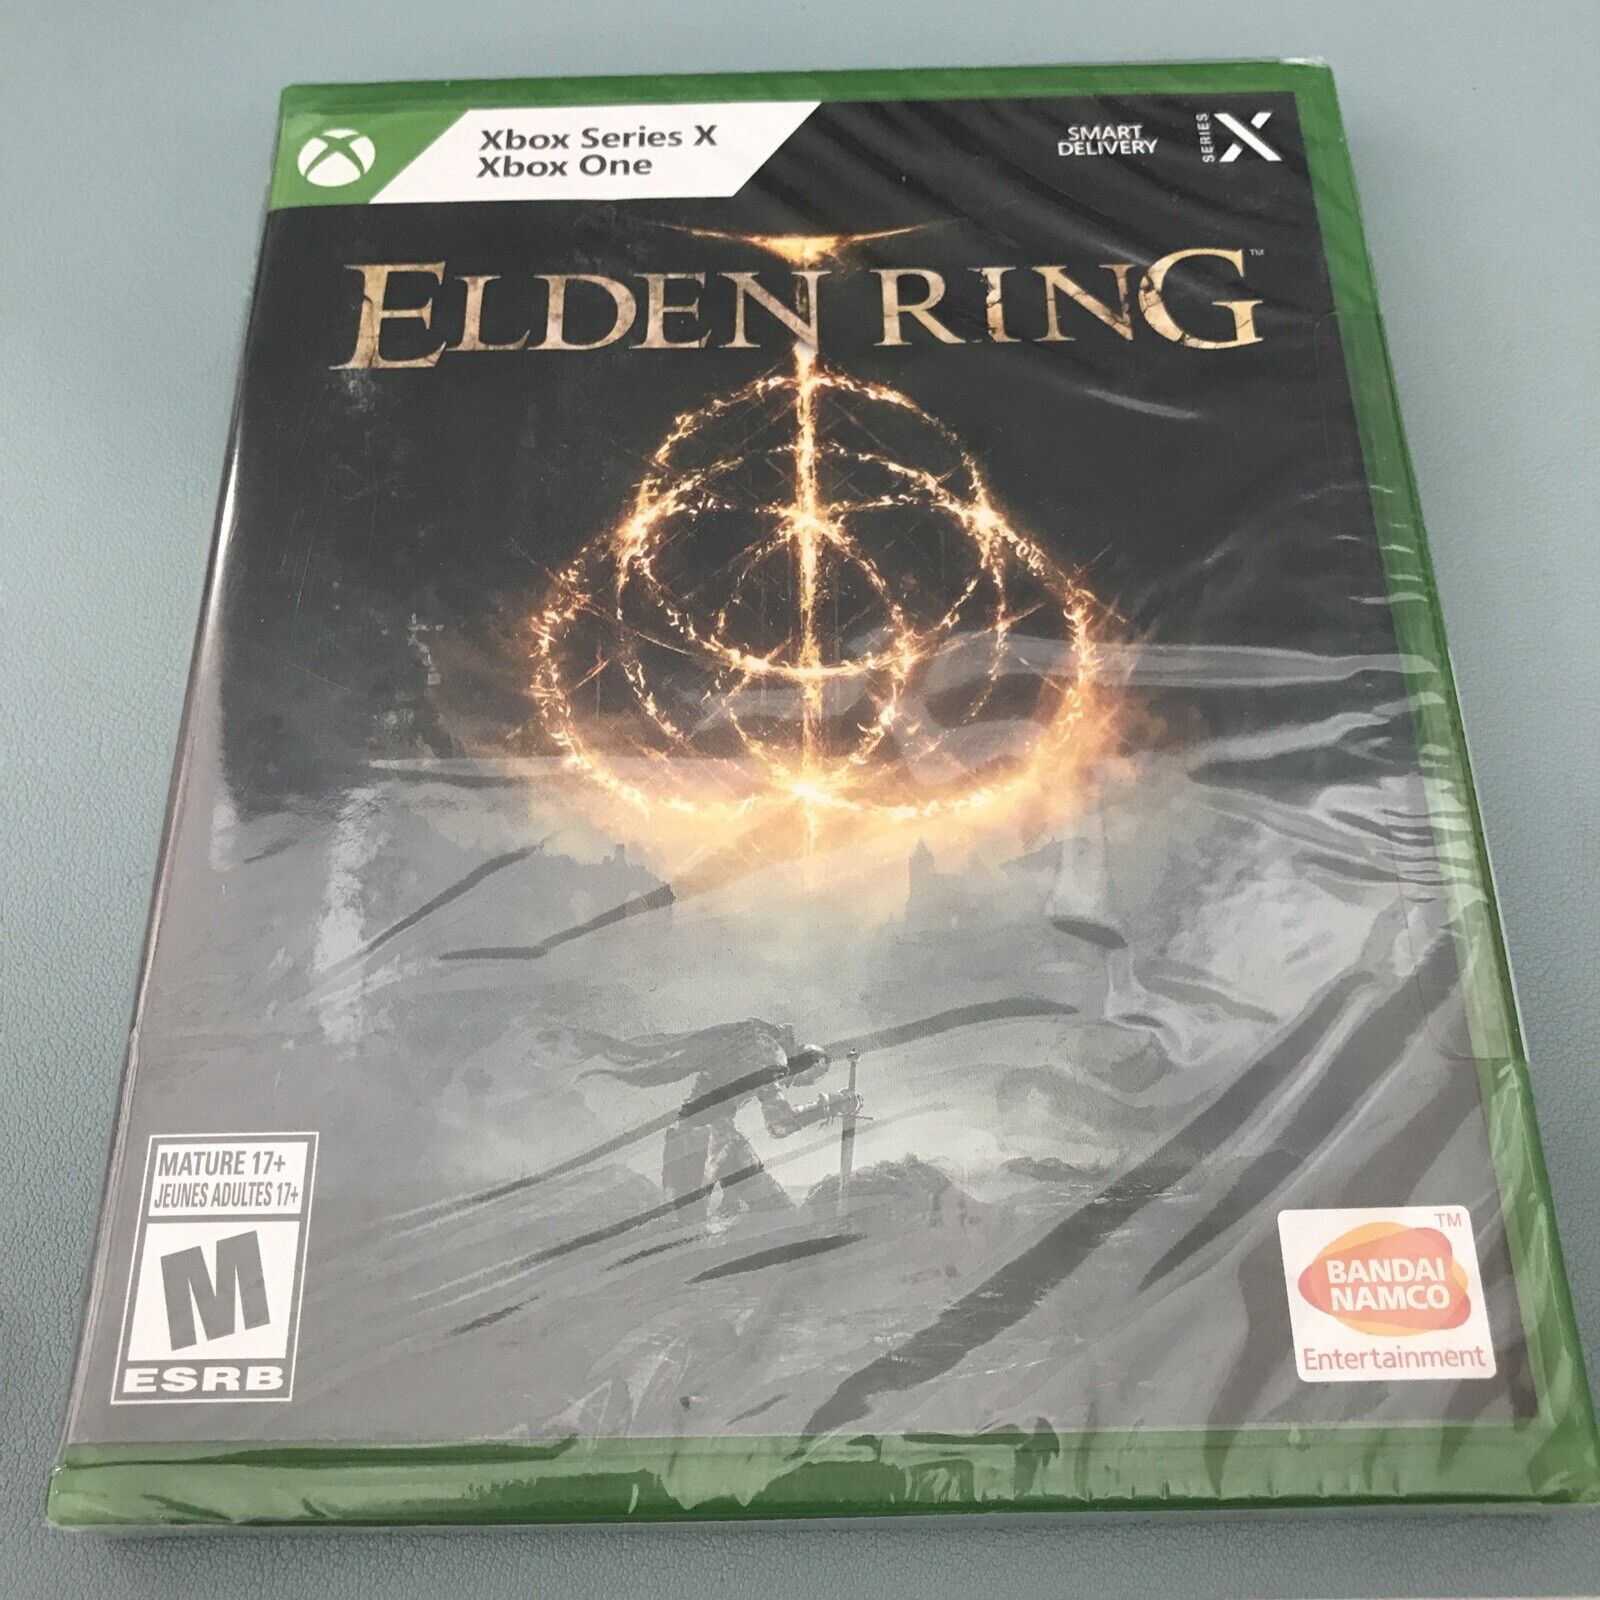 Adorable Brand New! Elden Ring (Microsoft Xbox Series X One XSX) Factory Sealed! on eBay